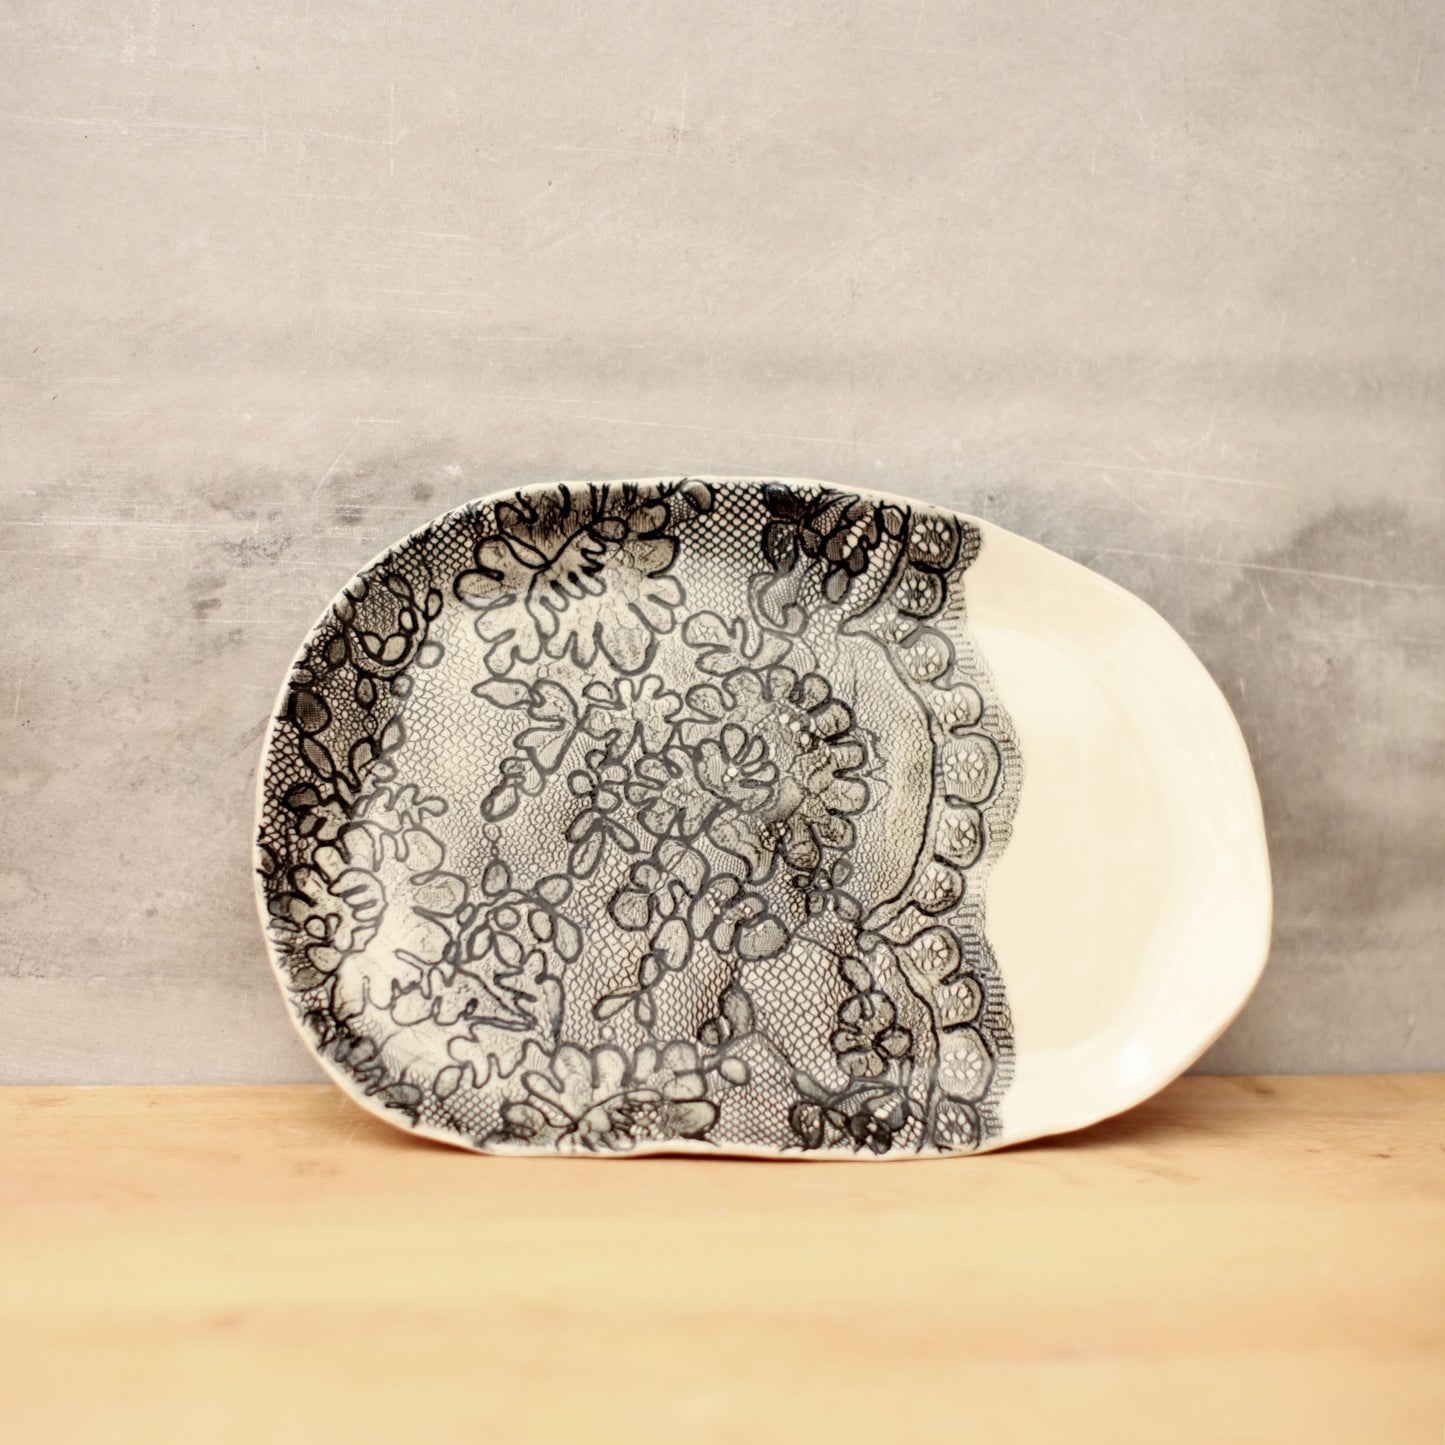 Pressed Lace Oval Platter - Black and Cream